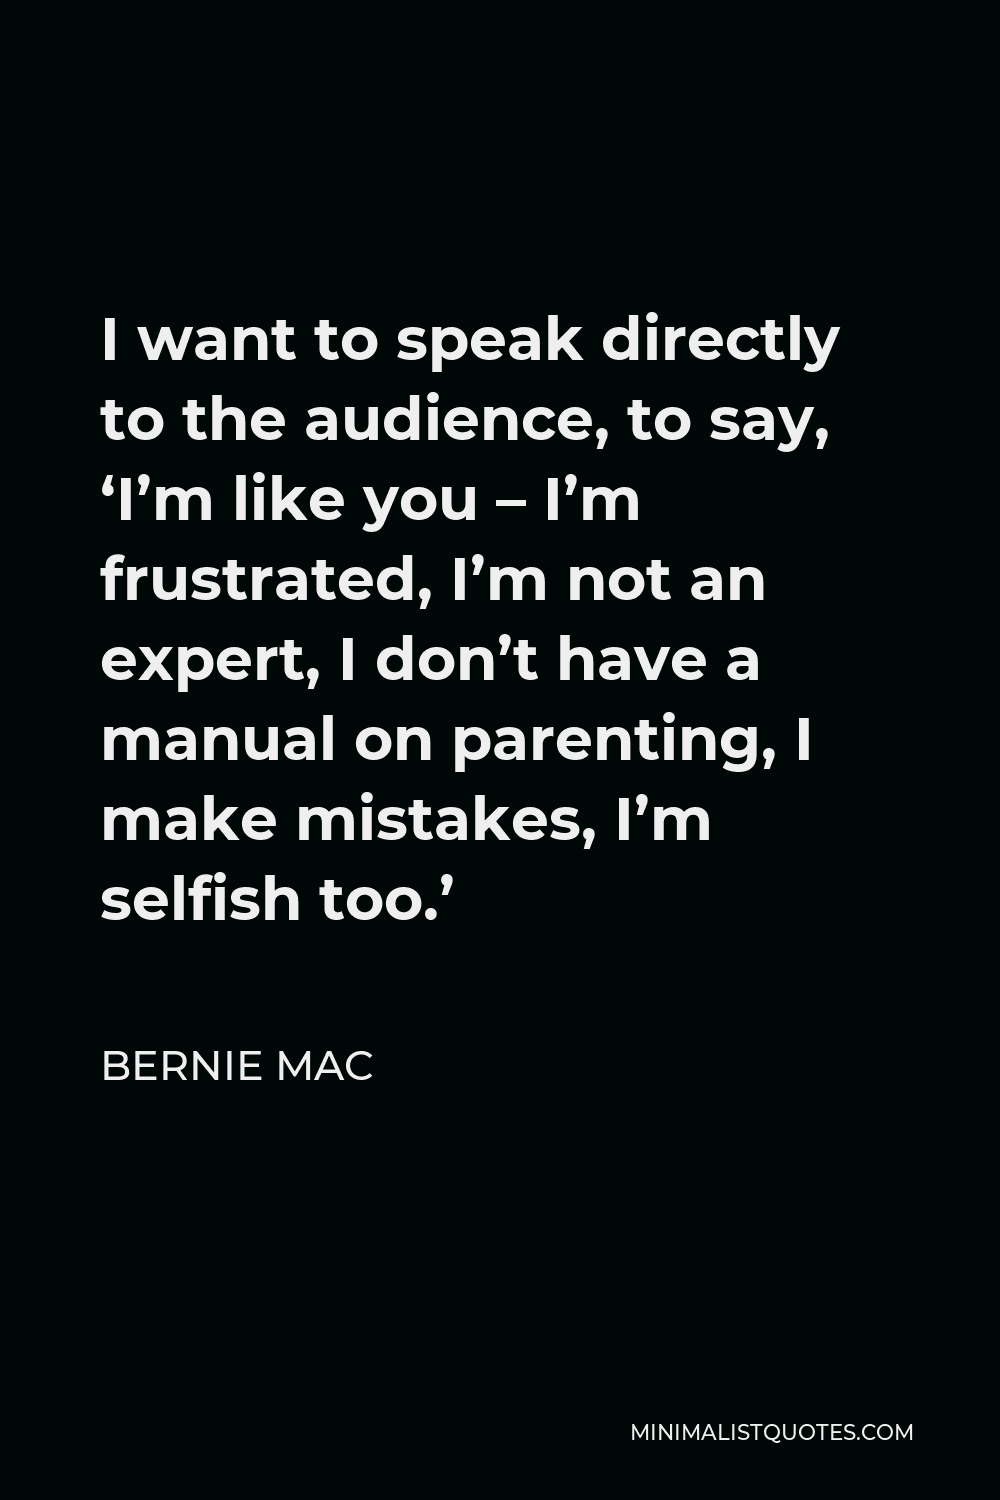 Bernie Mac Quote - I want to speak directly to the audience, to say, ‘I’m like you – I’m frustrated, I’m not an expert, I don’t have a manual on parenting, I make mistakes, I’m selfish too.’